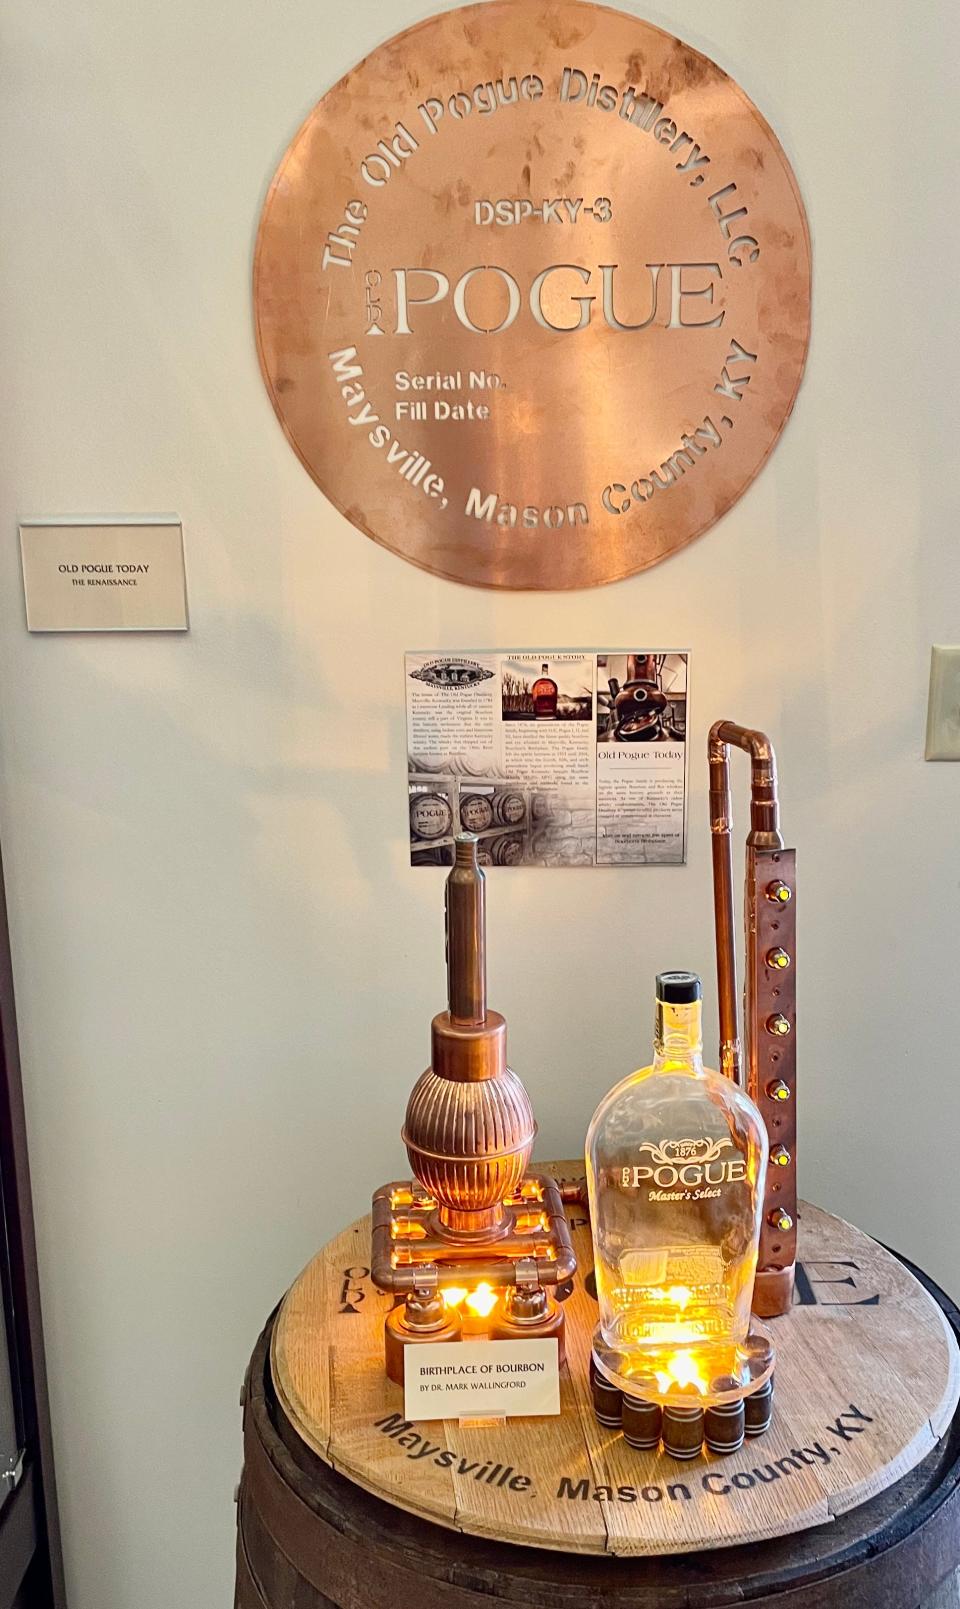 Maysville's bourbon heritage is explored at The Old Pogue Experience, part of the Gateway Museum Center.